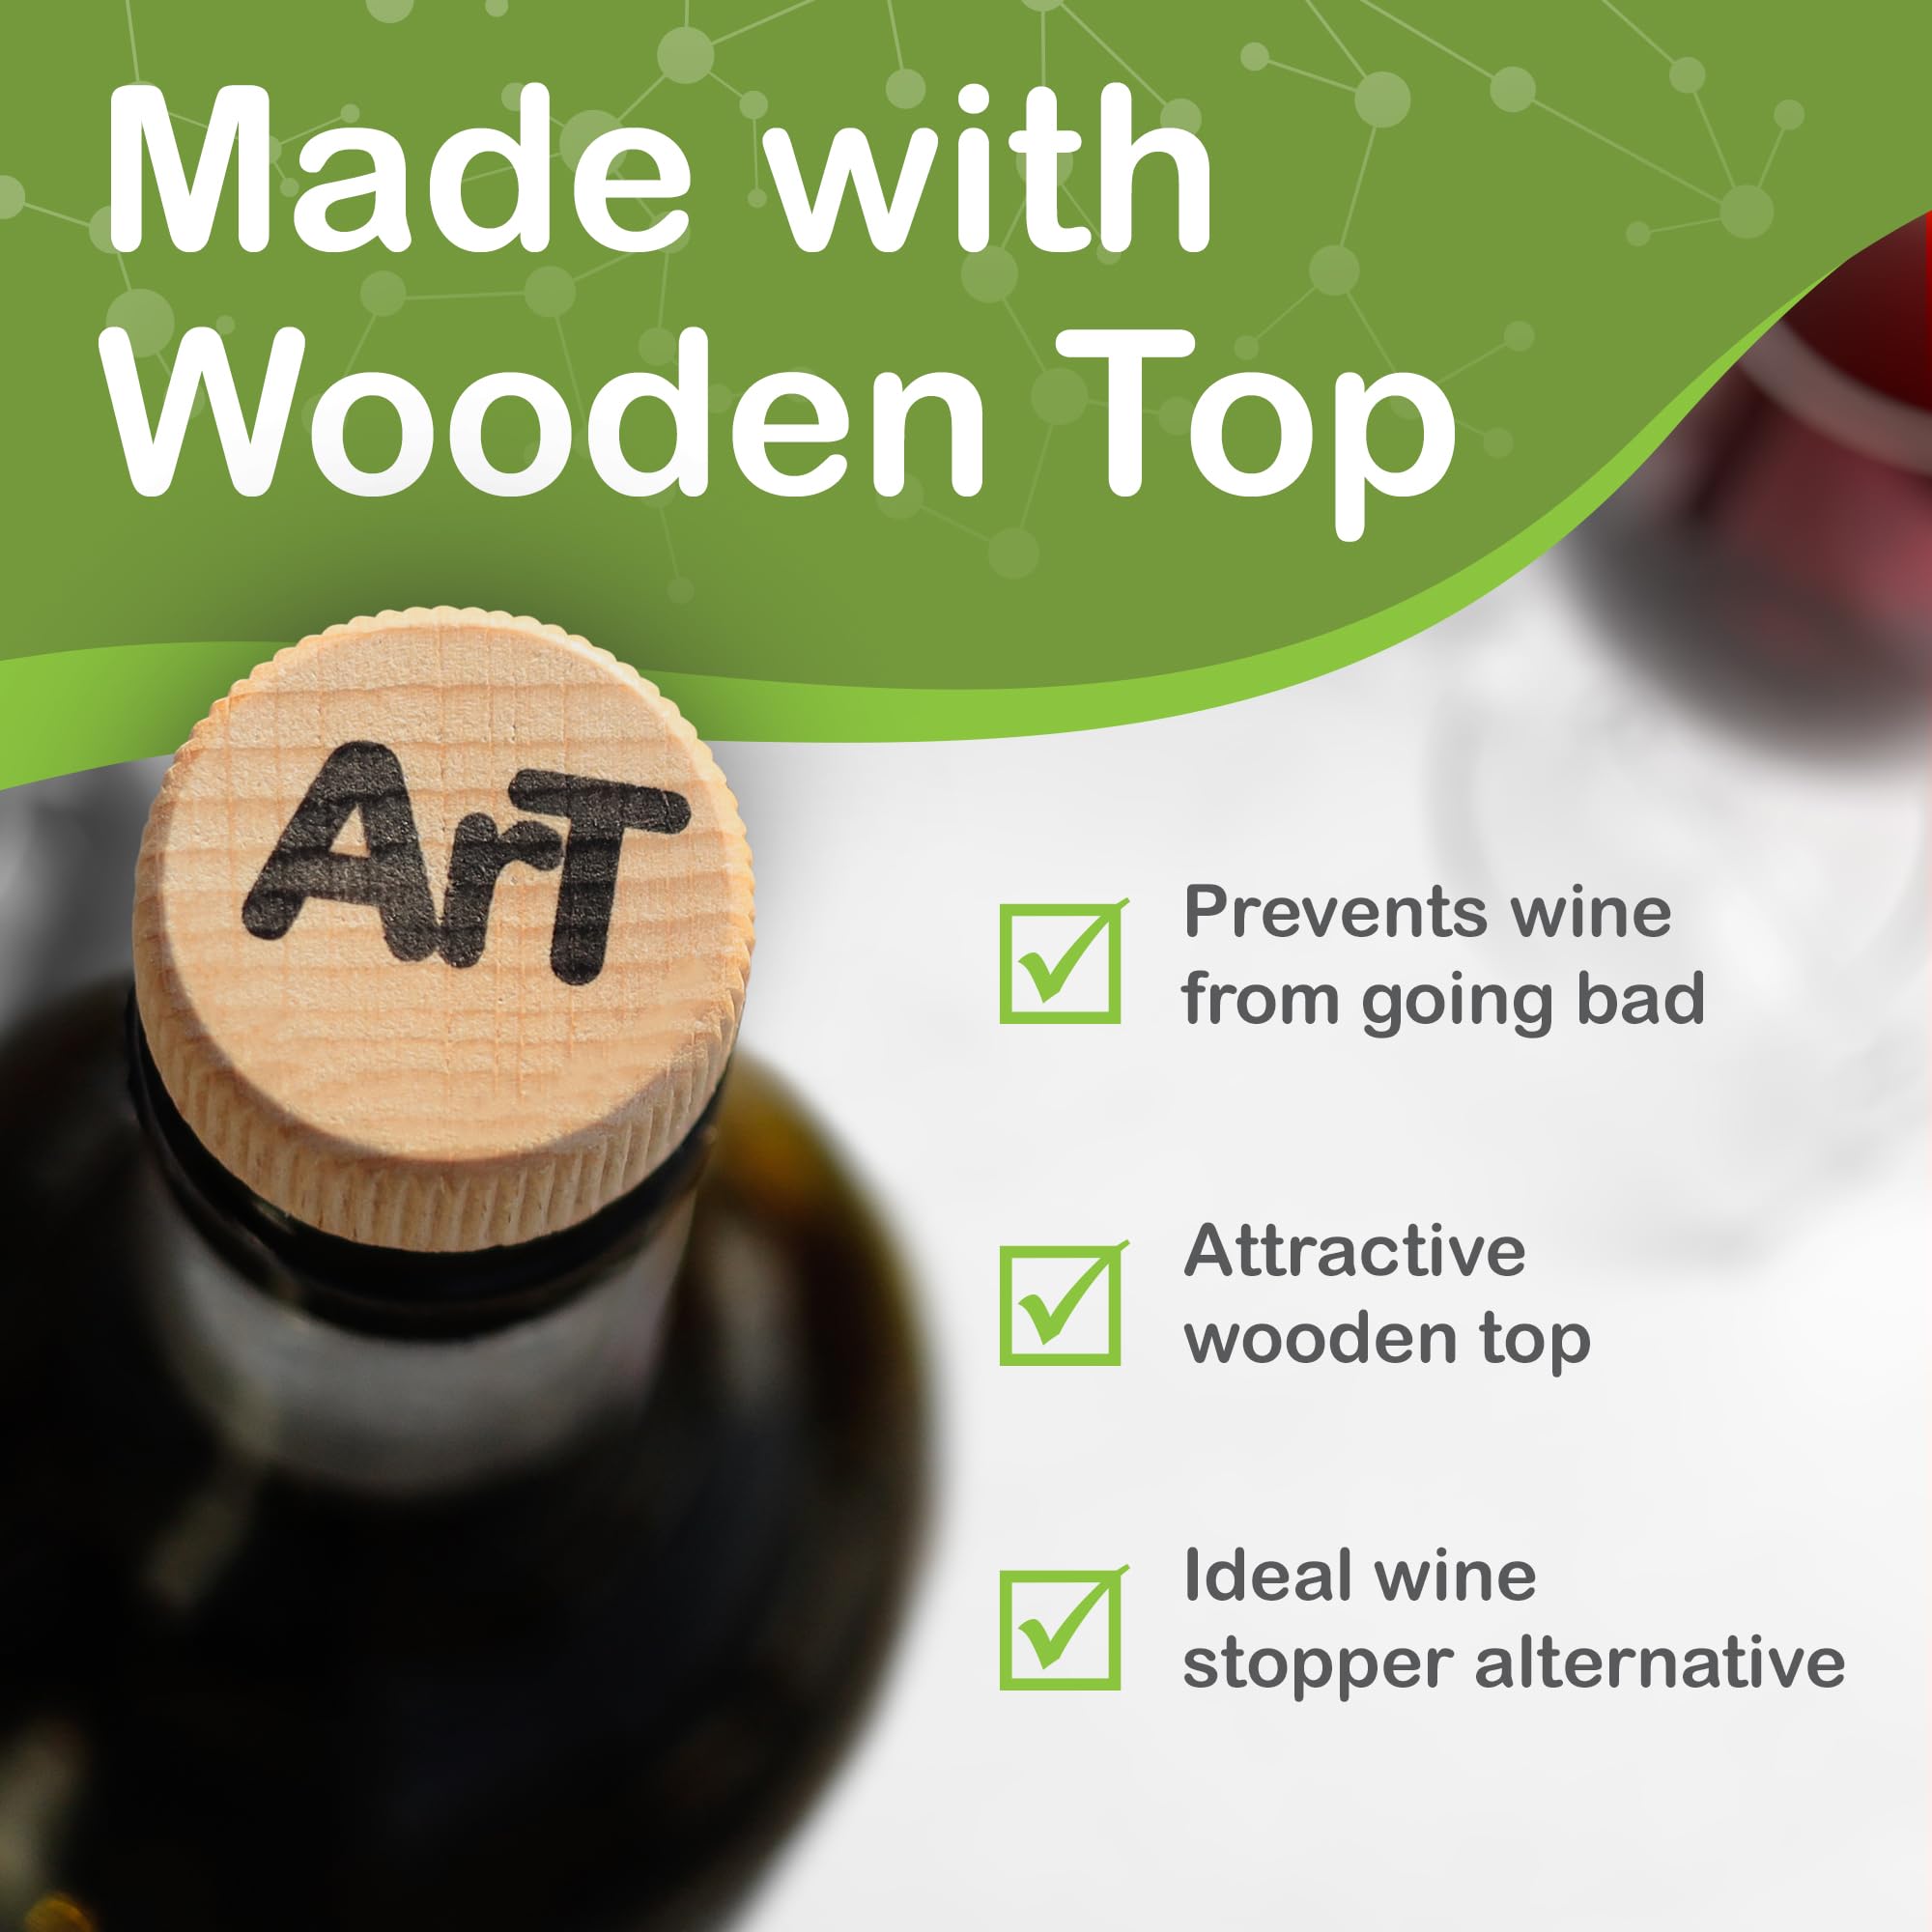 ArT Wine Preserver - Reusable Wine Stopper, Ideal Alternative for Vaccum Wine Bottle Stopper, Cork Wine Stoppers for Wine Bottles with a Wooden Top, Pack of 4 Wine Corks